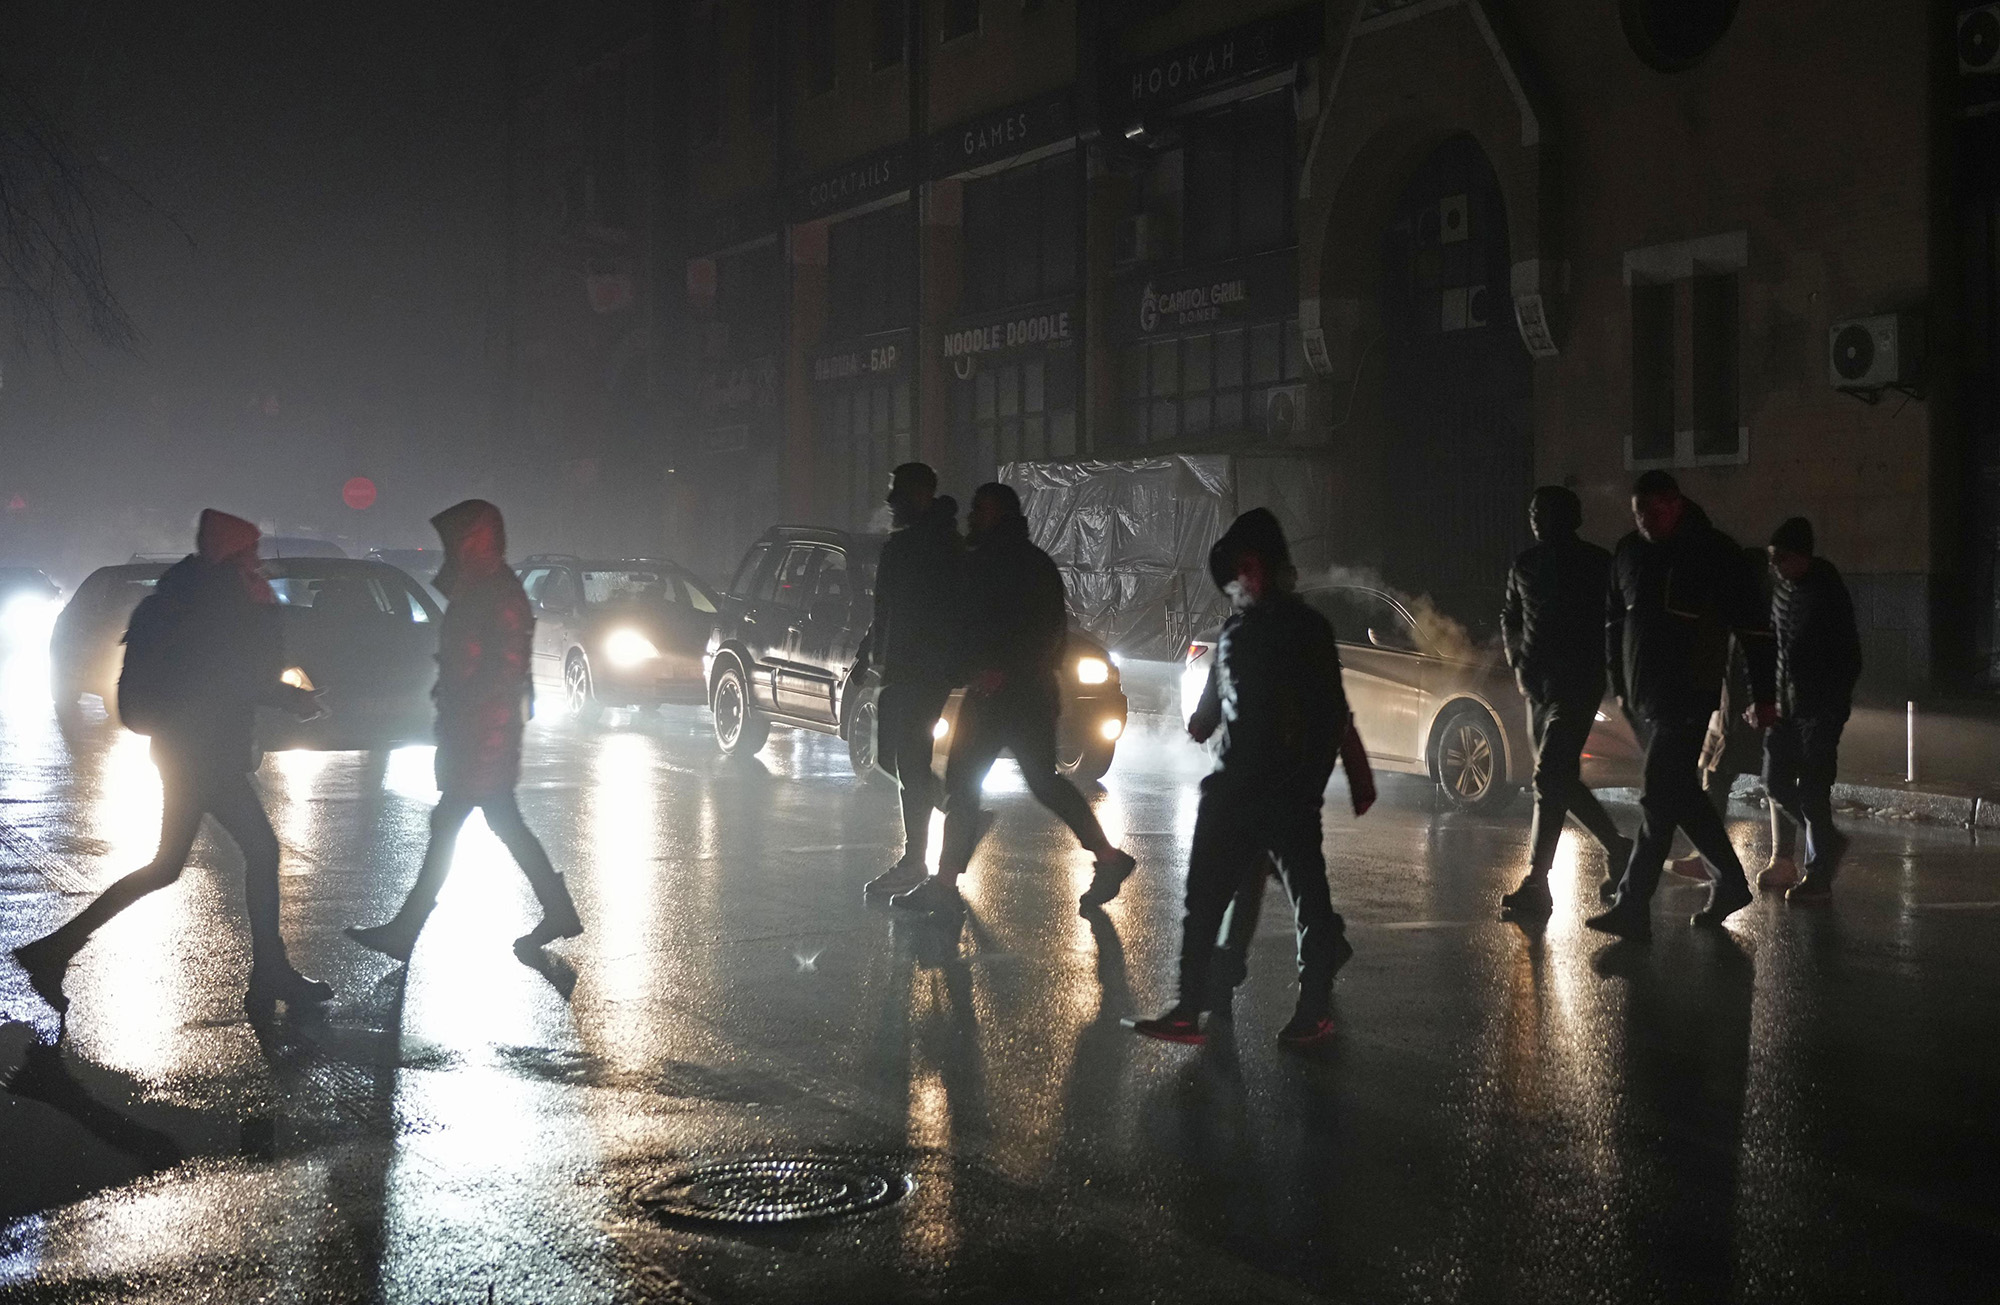 People cross a street in the dark in Kyiv, Ukraine, on November 24, after Russian air strikes caused power outages. 